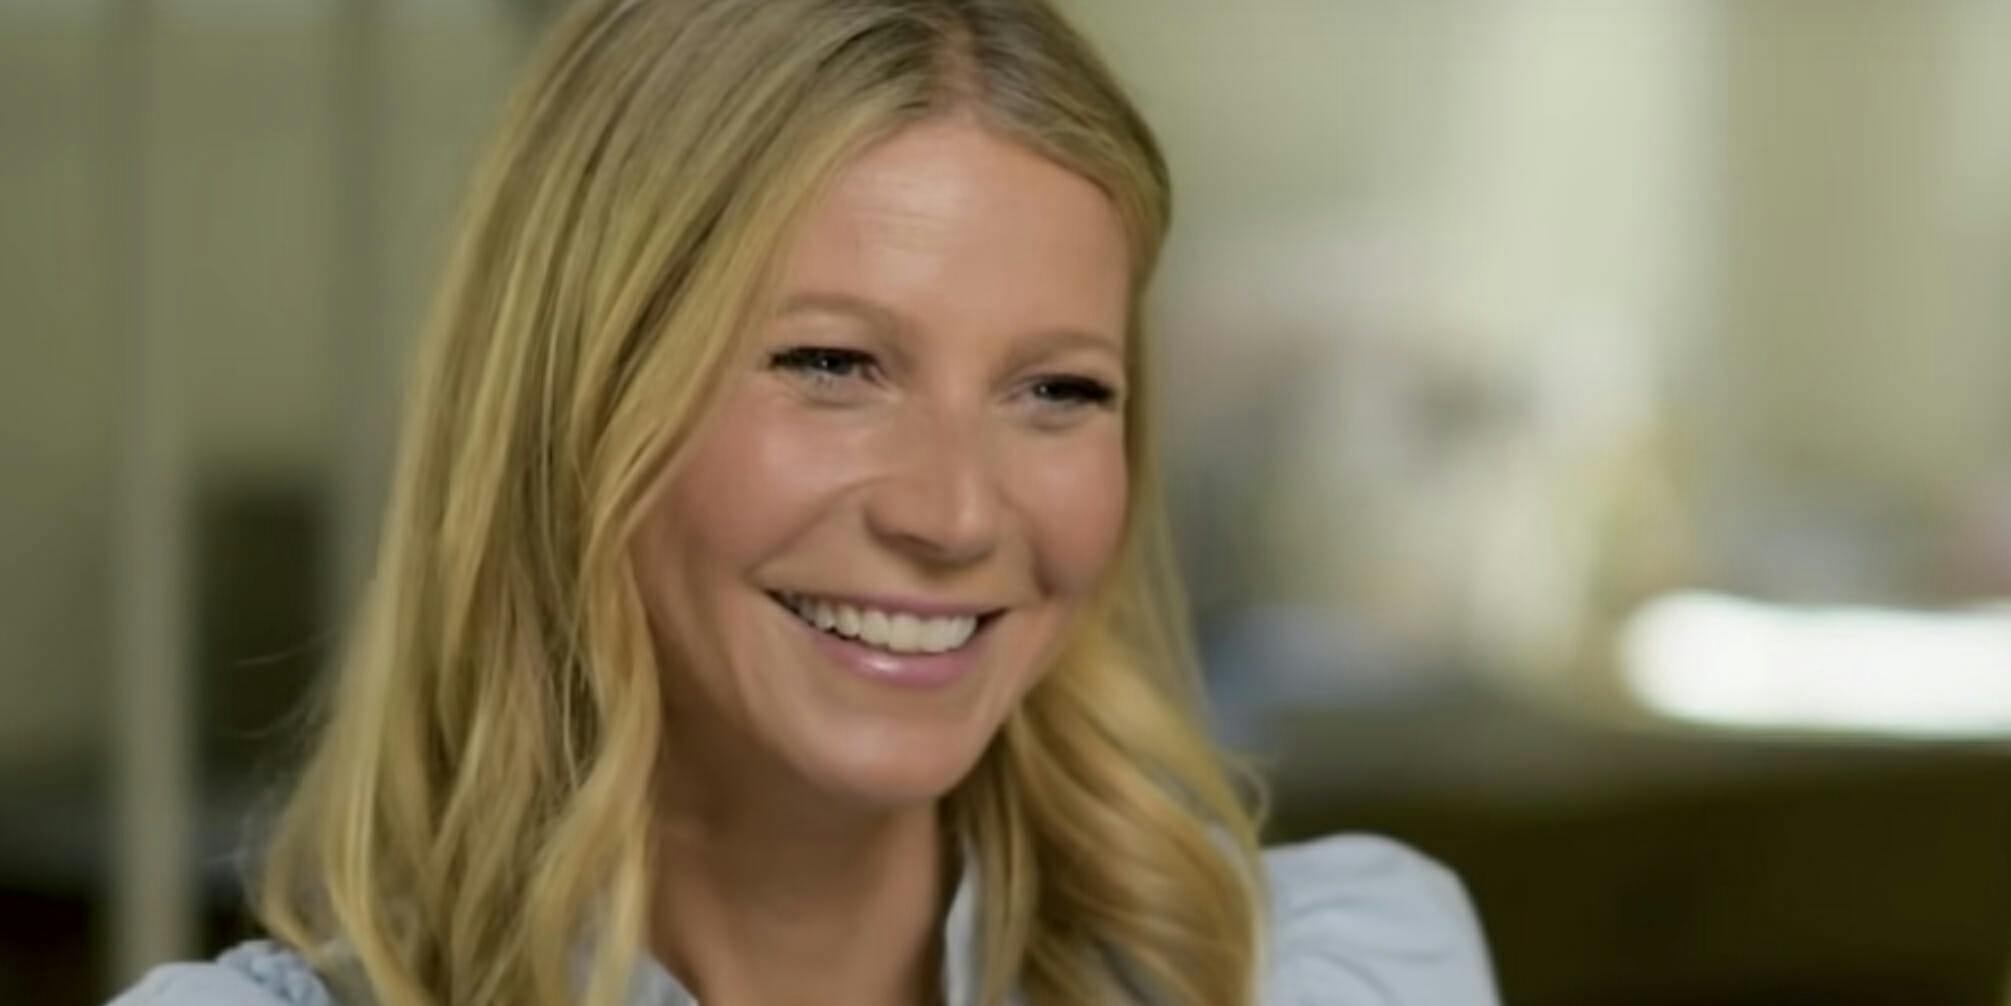 Gwyneth Paltrow concedes she was ‘thinking about d*ck’ in this meme